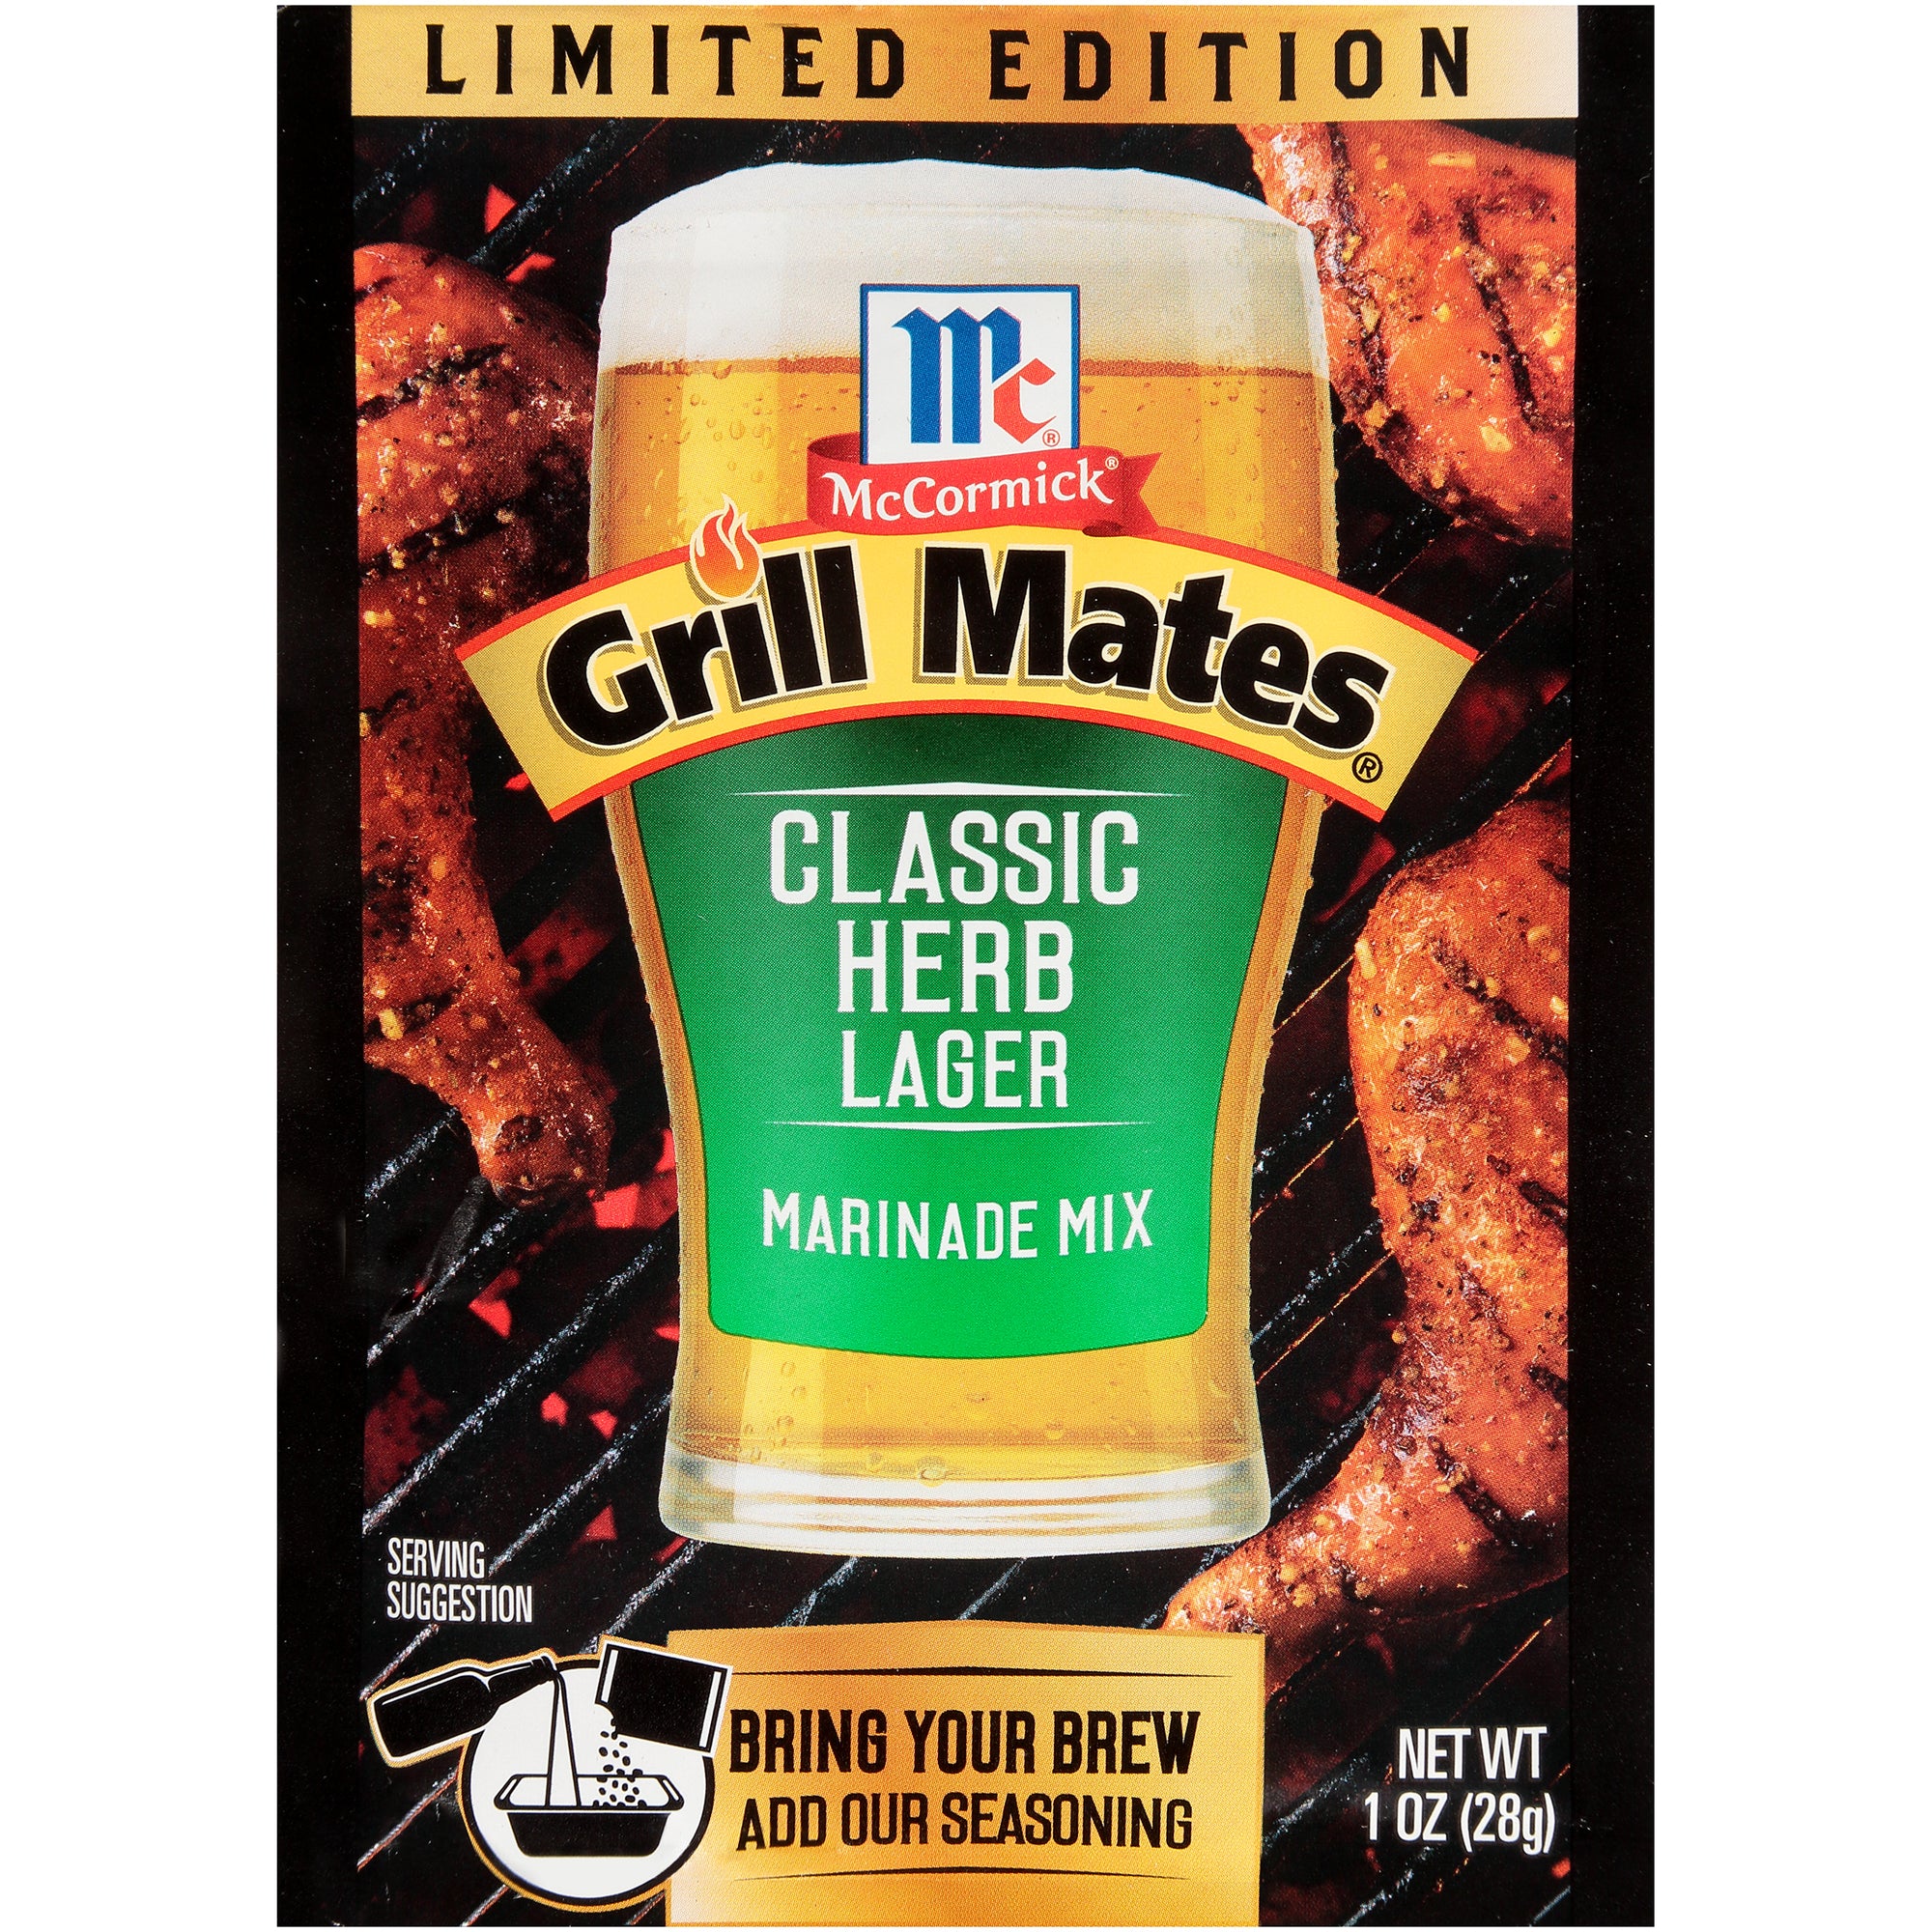 Grill Mates Classic Herb Lager Marinade Mix 1 oz.